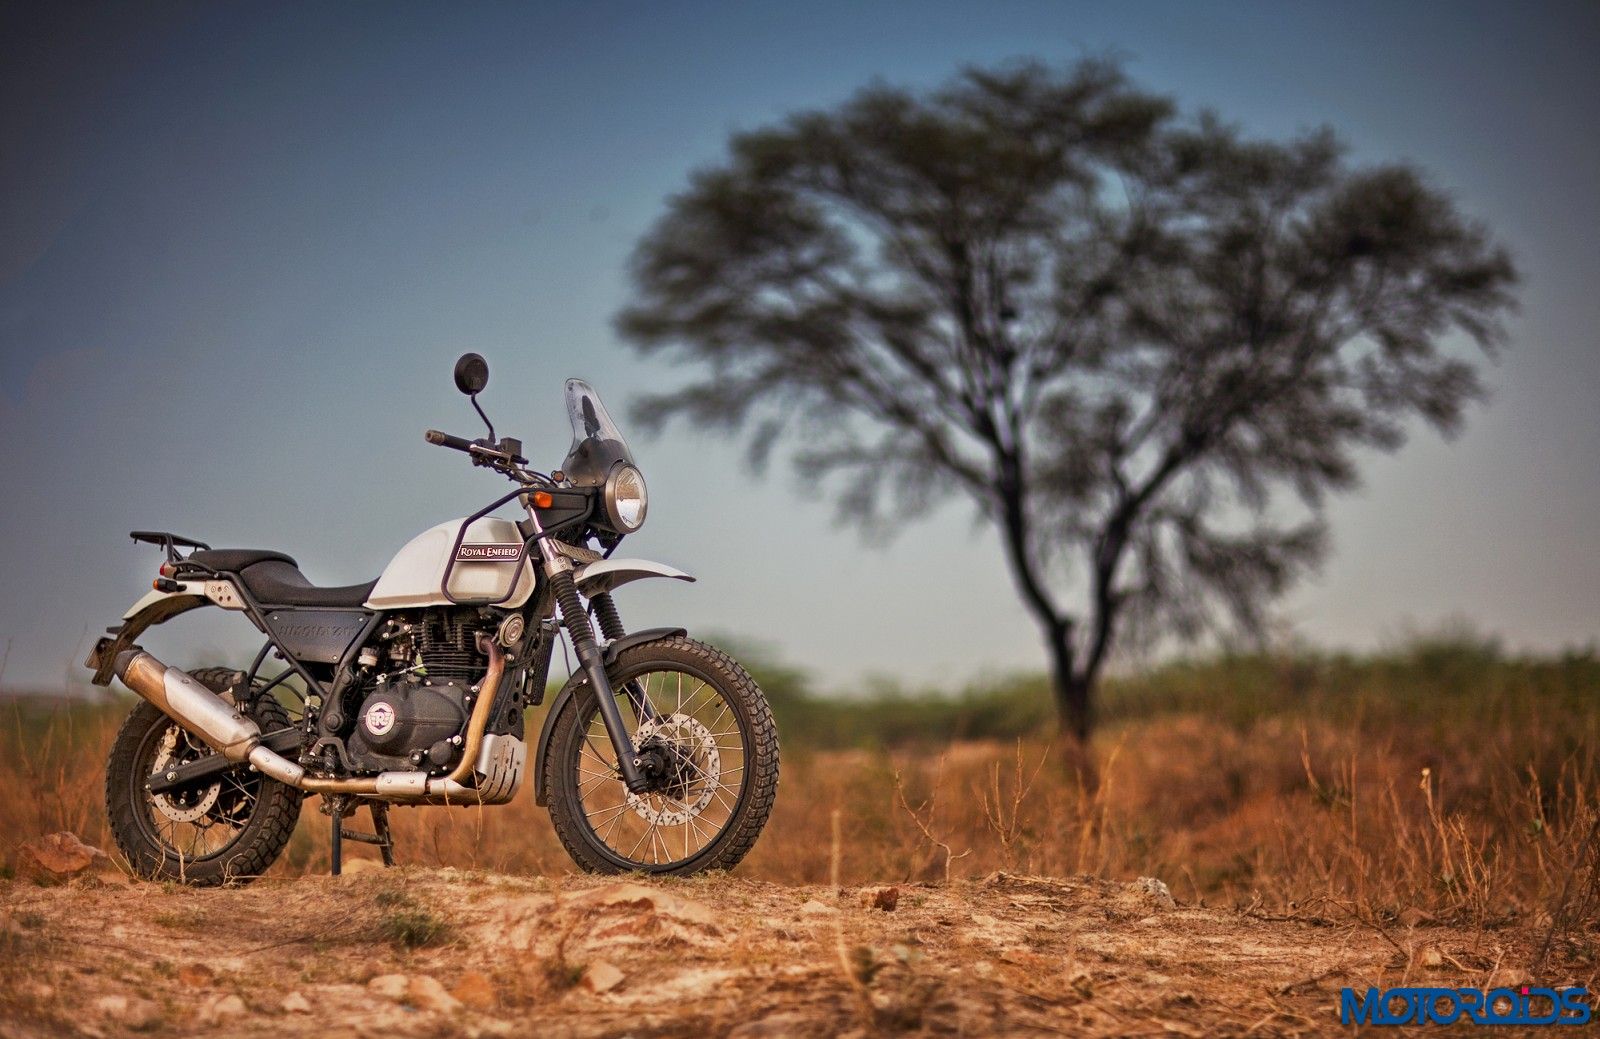 Two Wheeler Sales July 2016: Royal Enfield Registers 31% Growth